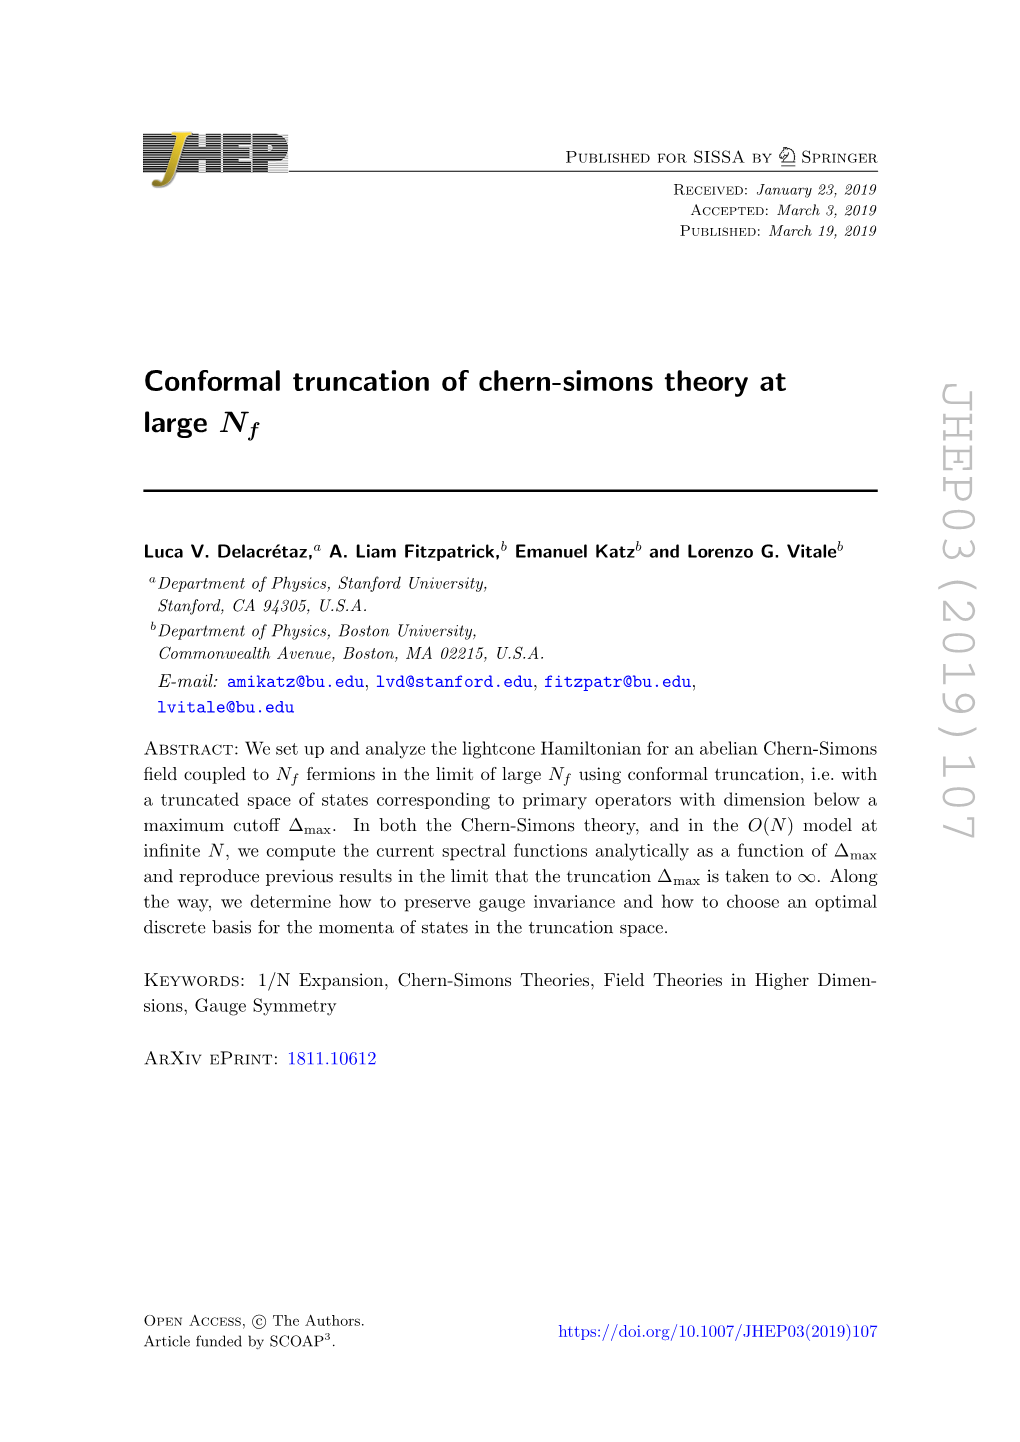 Conformal Truncation of Chern-Simons Theory at Large Nf